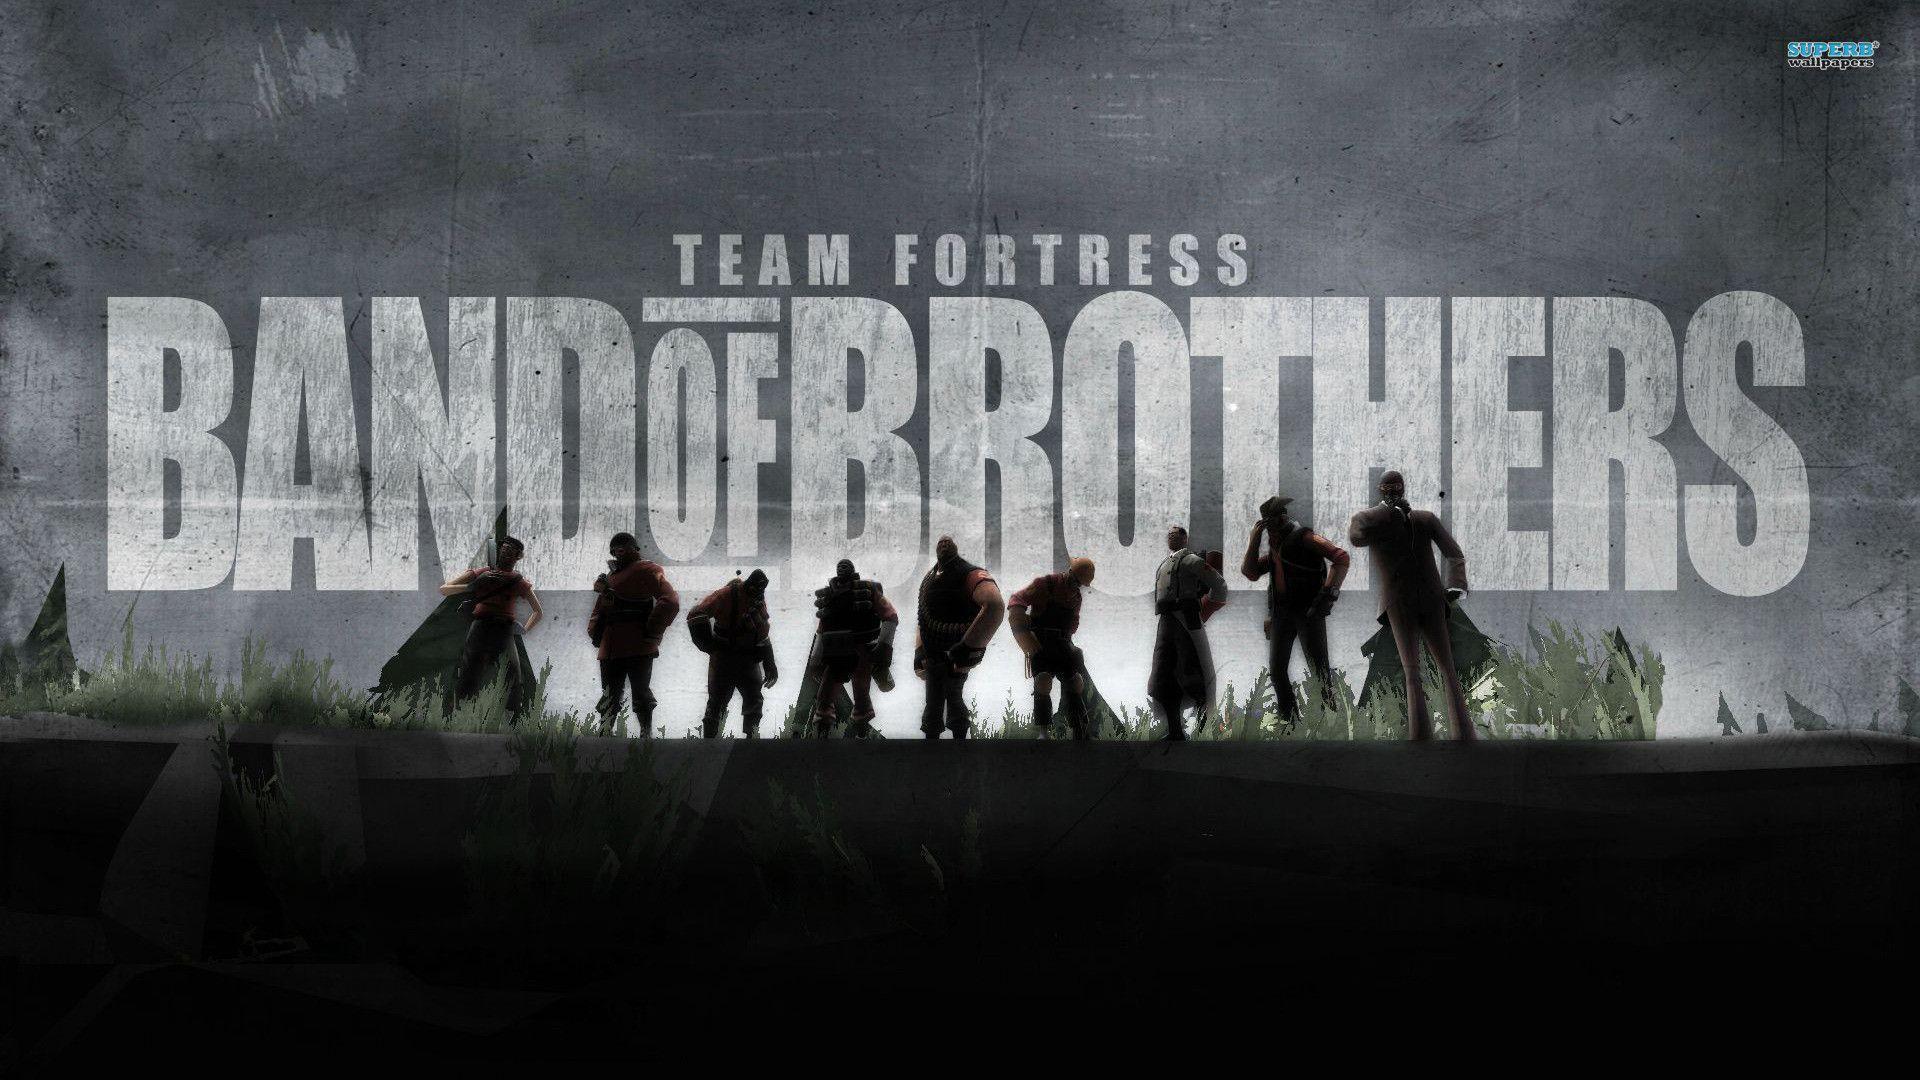 Team Fortress Band of Brothers wallpaper wallpaper - #